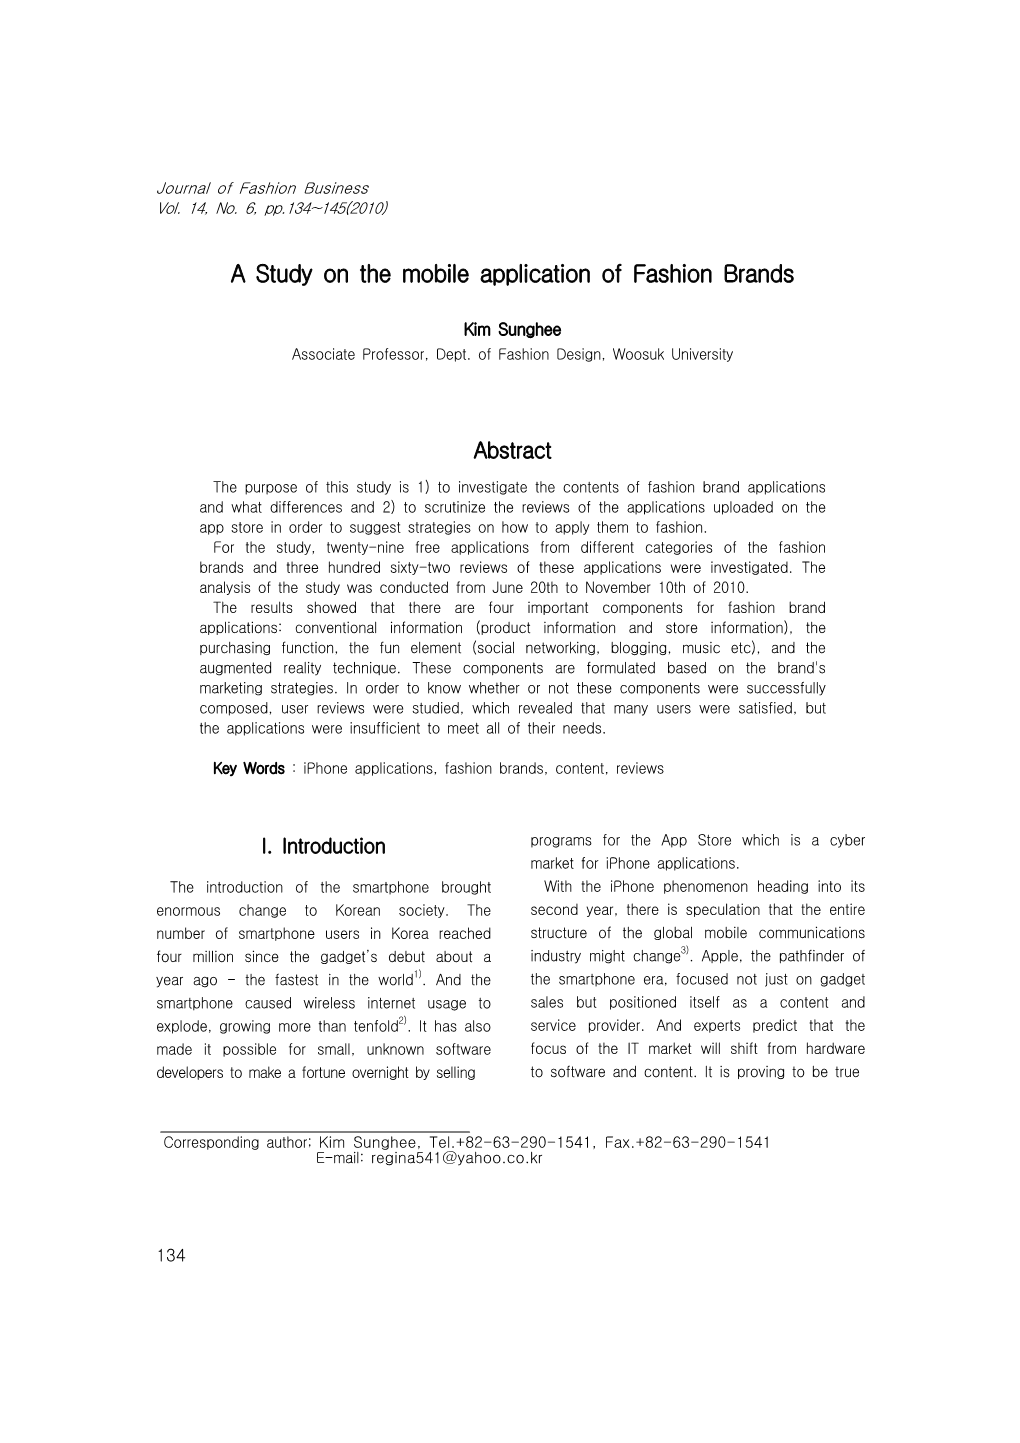 A Study on the Mobile Application of Fashion Brands